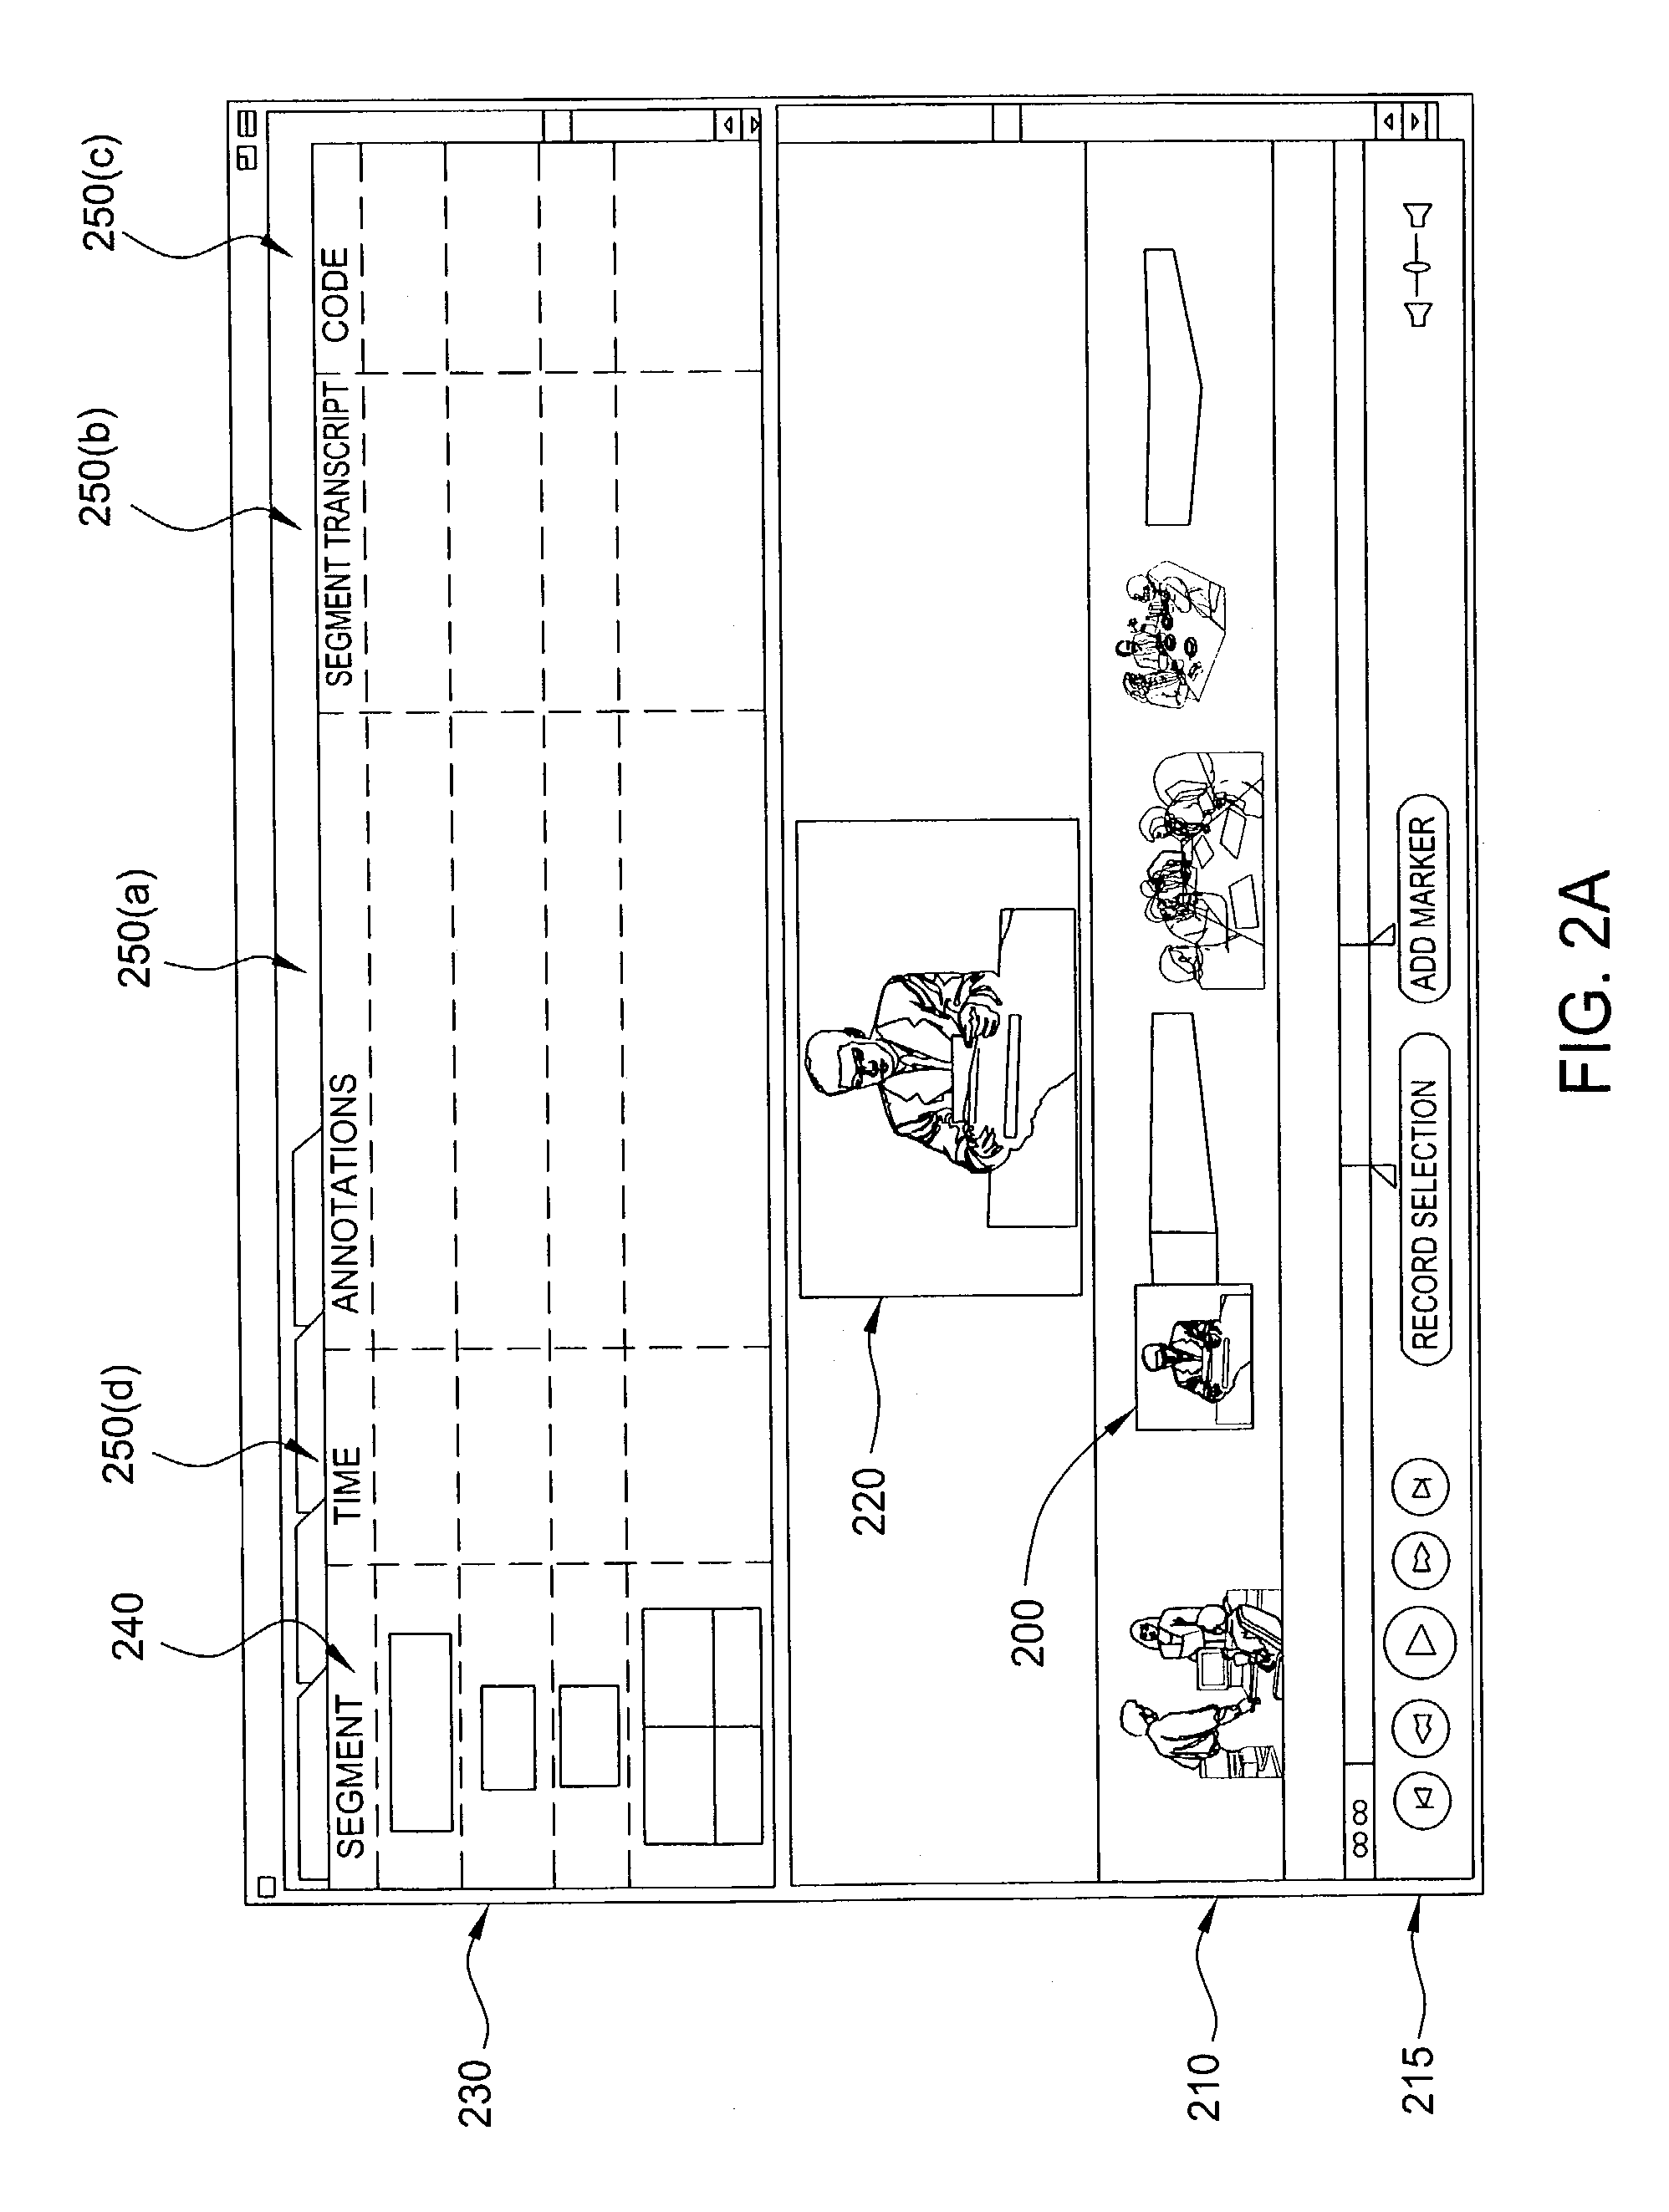 Methods and apparatus for interactive map-based analysis of digital video content